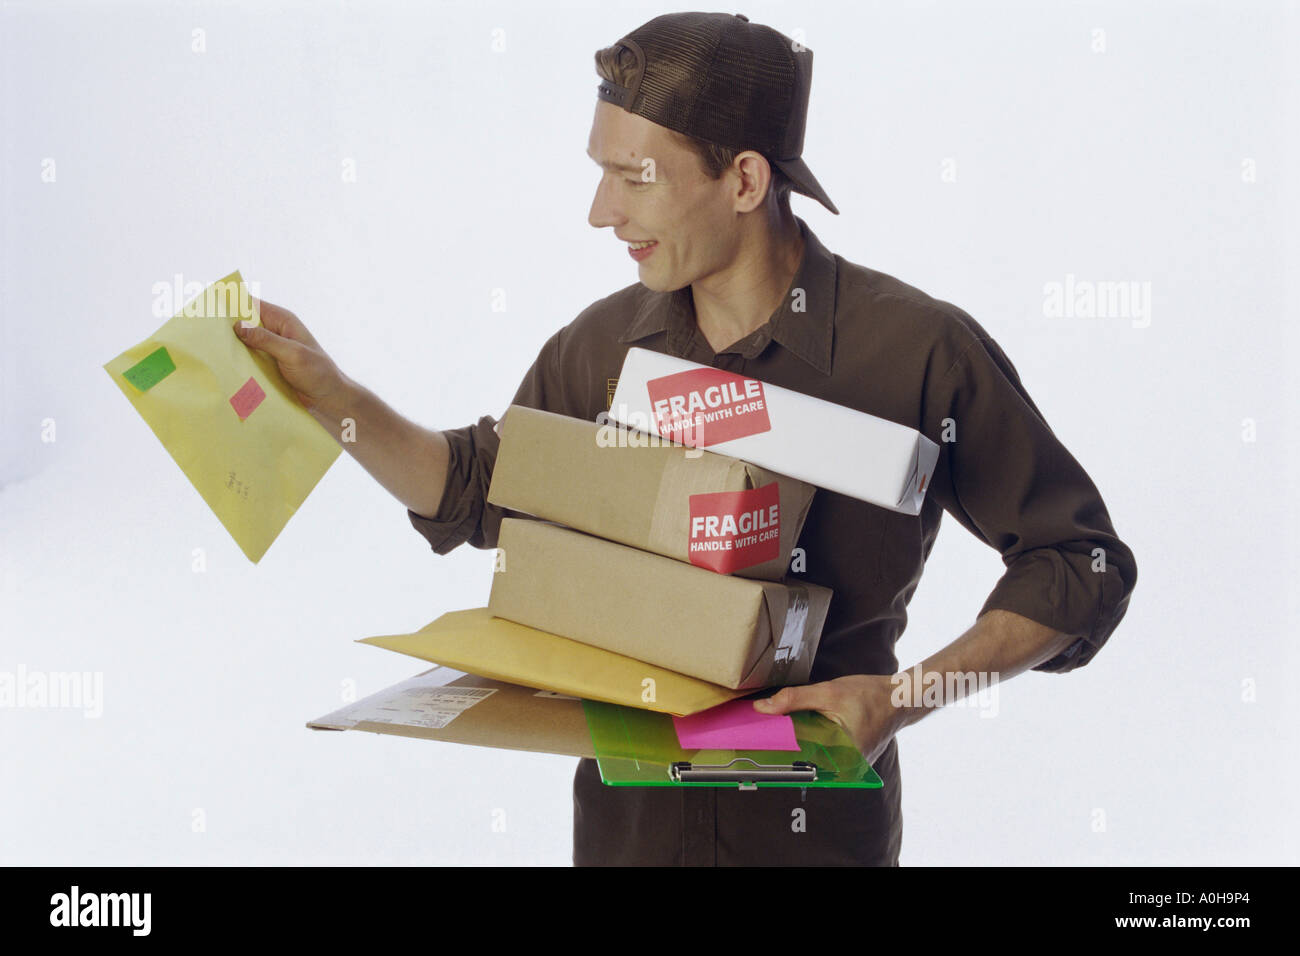 Delivery man holding delivery packages Stock Photo